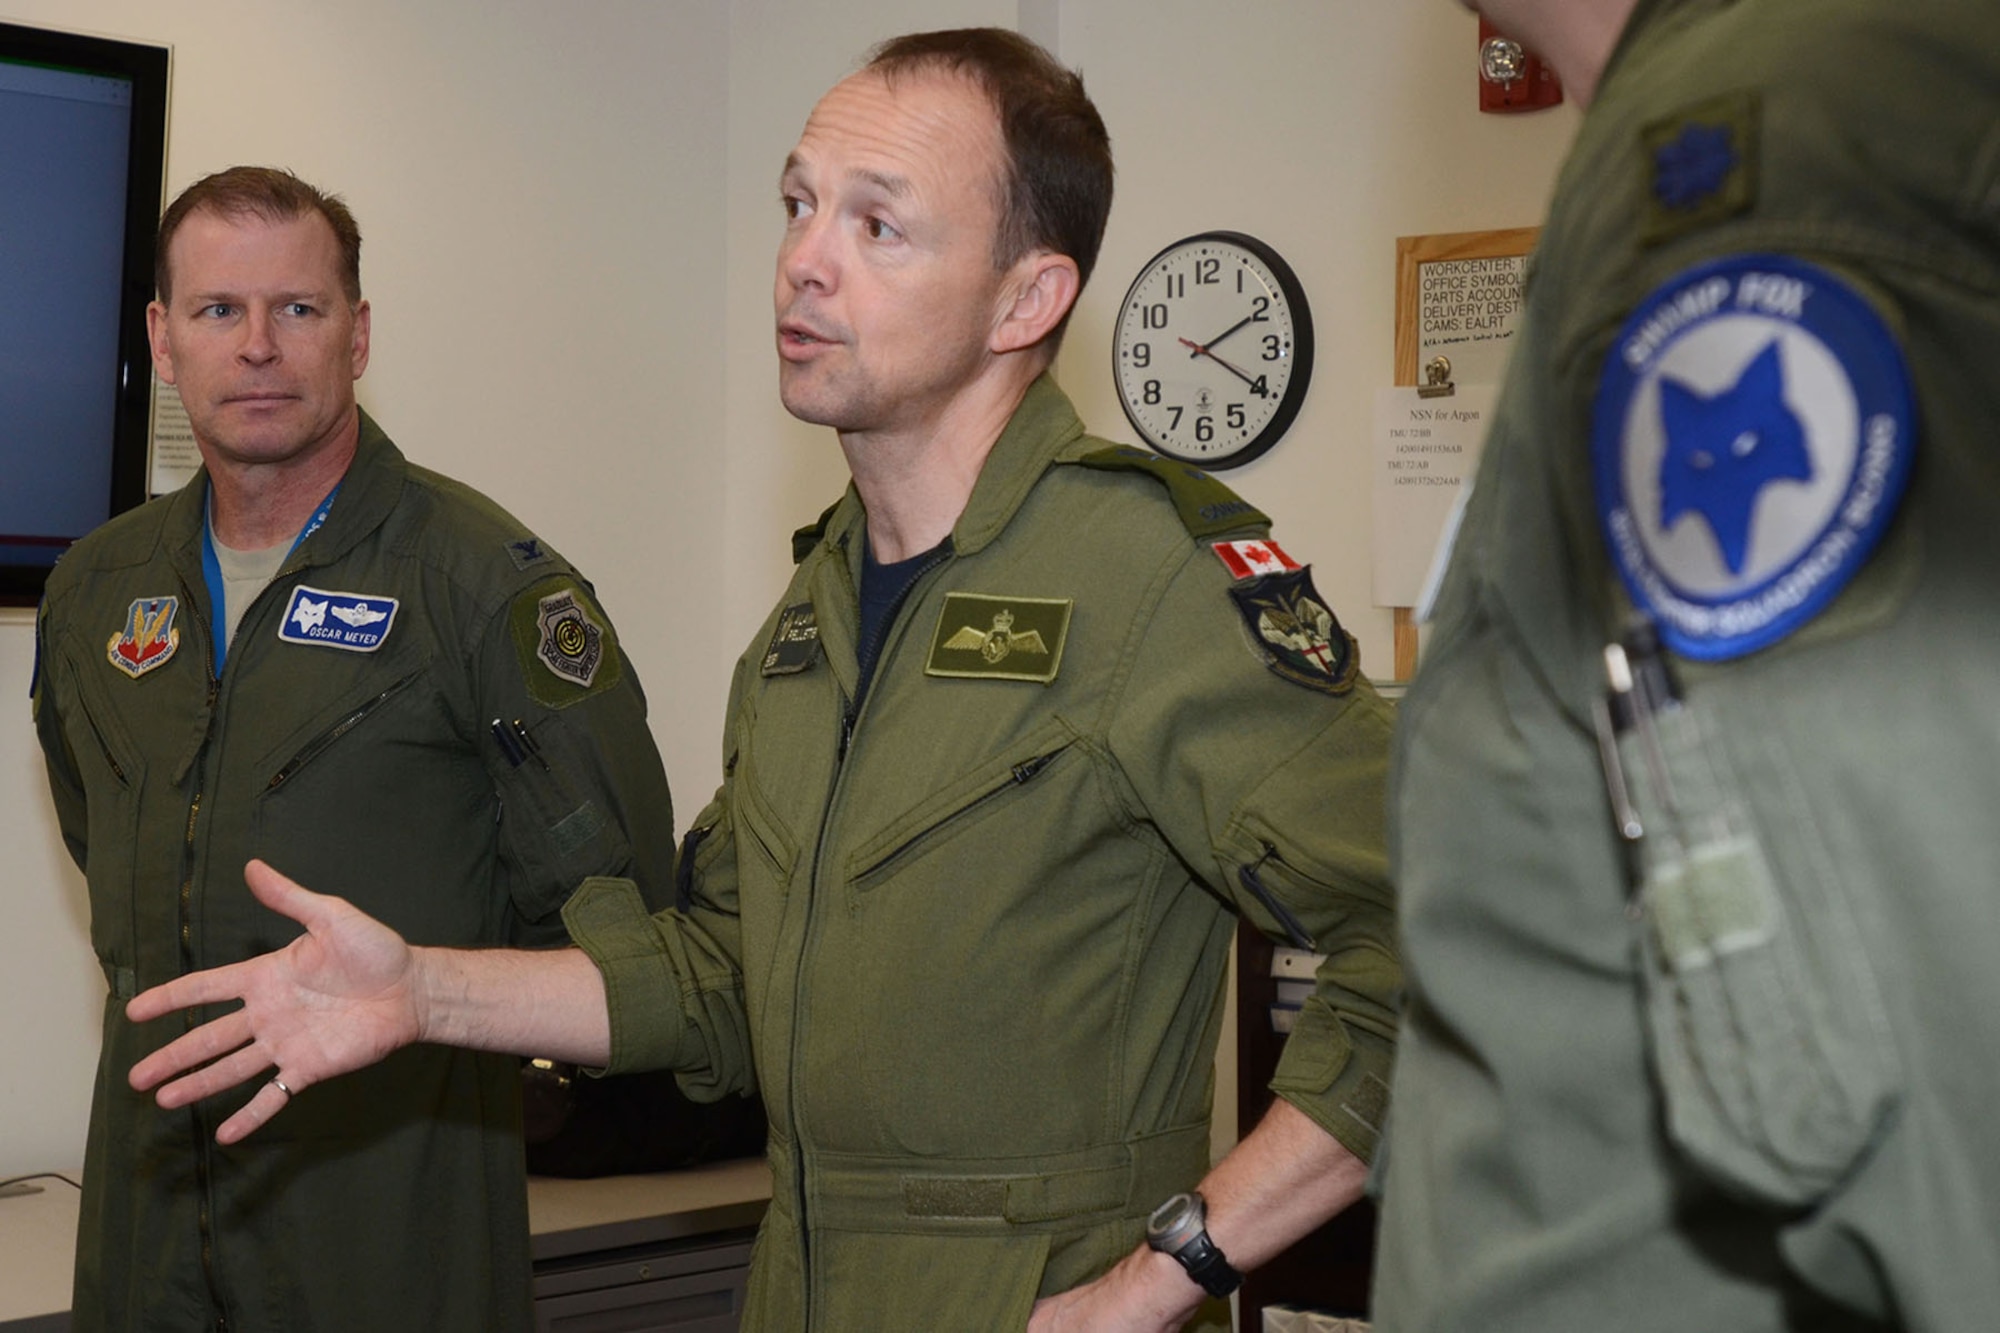 Canadian Forces Brig. Gen. Alain Pelletier, deputy commander Continental United States NORAD Region (CONR), receives and orientation flight on an F-16 Fighting Falcon fighter jet accompanied by Lt. Col. Ian Toogood, commander of the 169th Aerospace Control Alert Squadron, during his visit to the South Carolina Air National Guard's 169th Fighter Wing at McEntire Joint National Guard Station, Mar. 1, 2016. During his visit, Brig. Gen. Pelletier spoke to wing leadership about its homeland defense mission and the relationship it has with the NORAD air component as it is tasked through CONR to ensure North American airspace control. The 169th FW has provided support for numerous CONR training and air defense events in past years. (U.S. Air National Guard photo by Senior Airman Megan R. Floyd) 